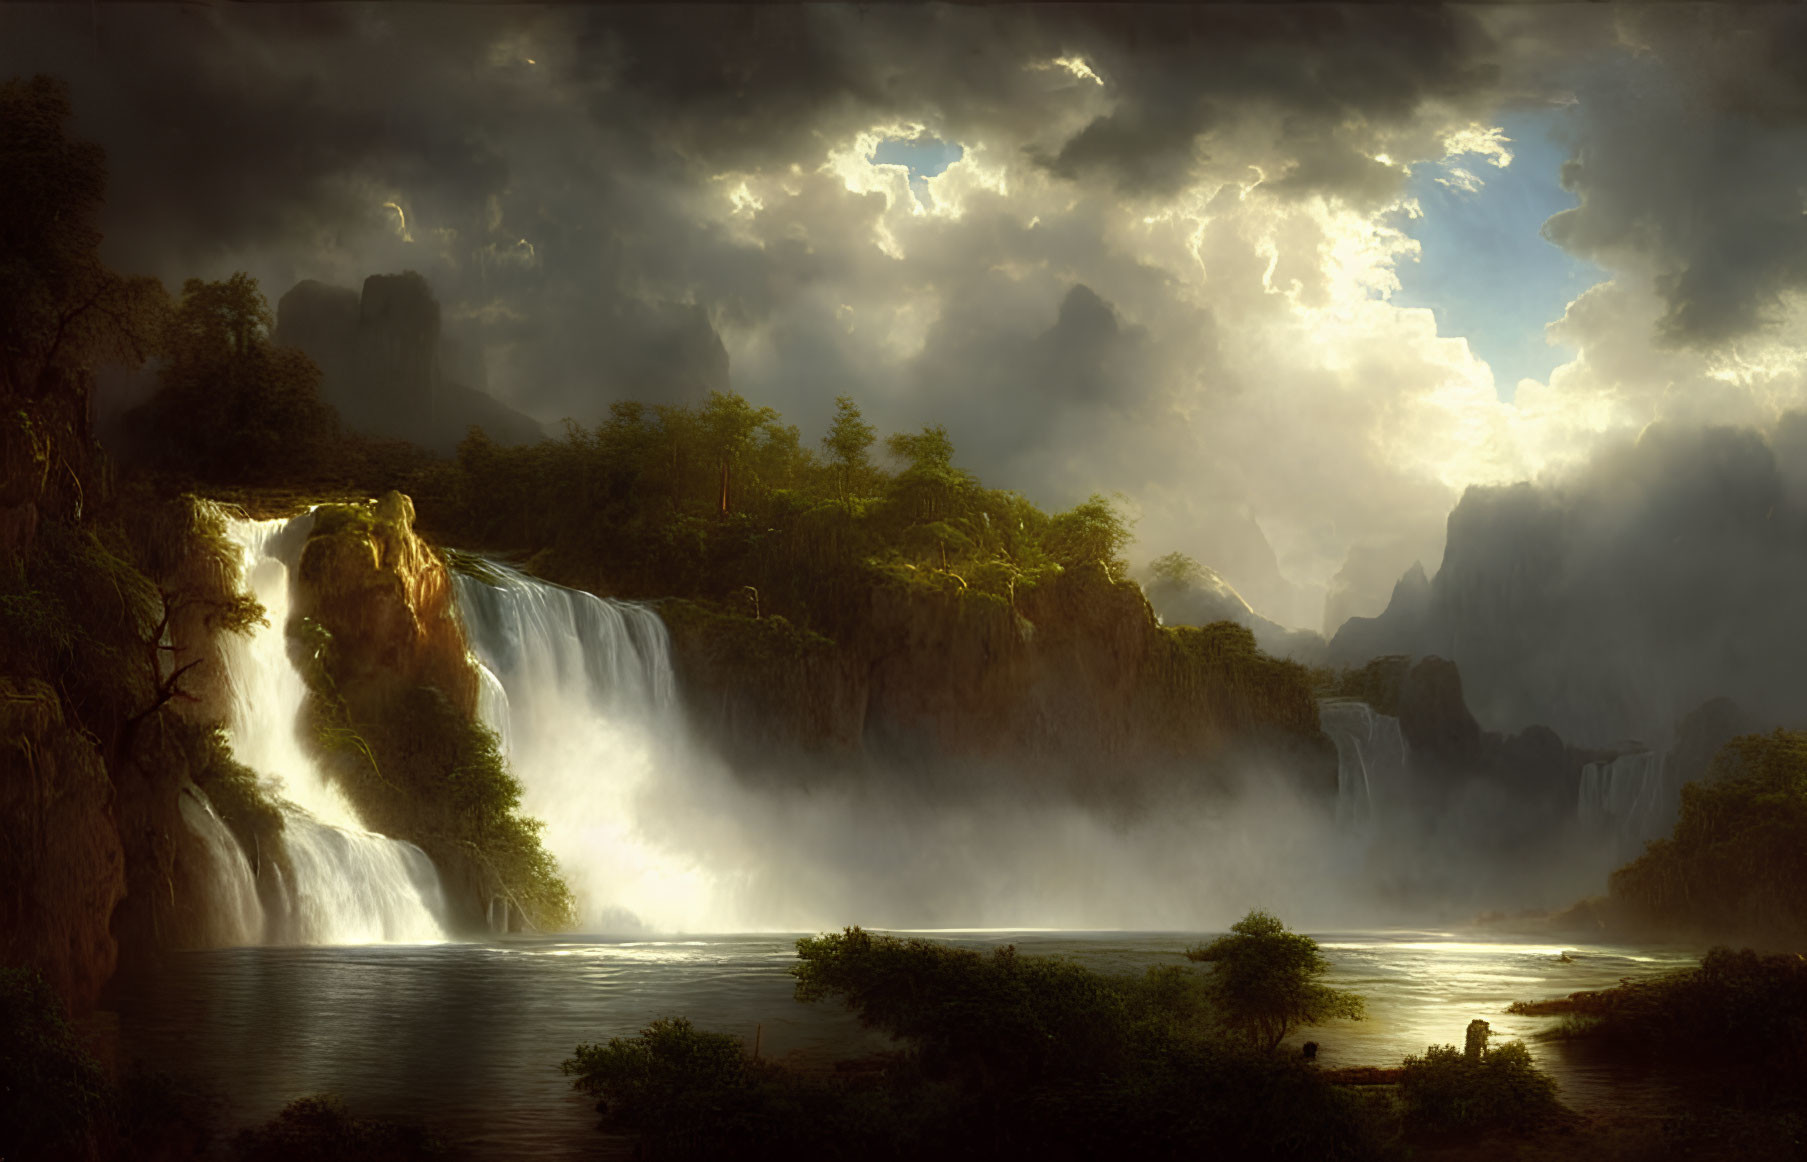 Tranquil landscape with waterfall, lake, and lush foliage